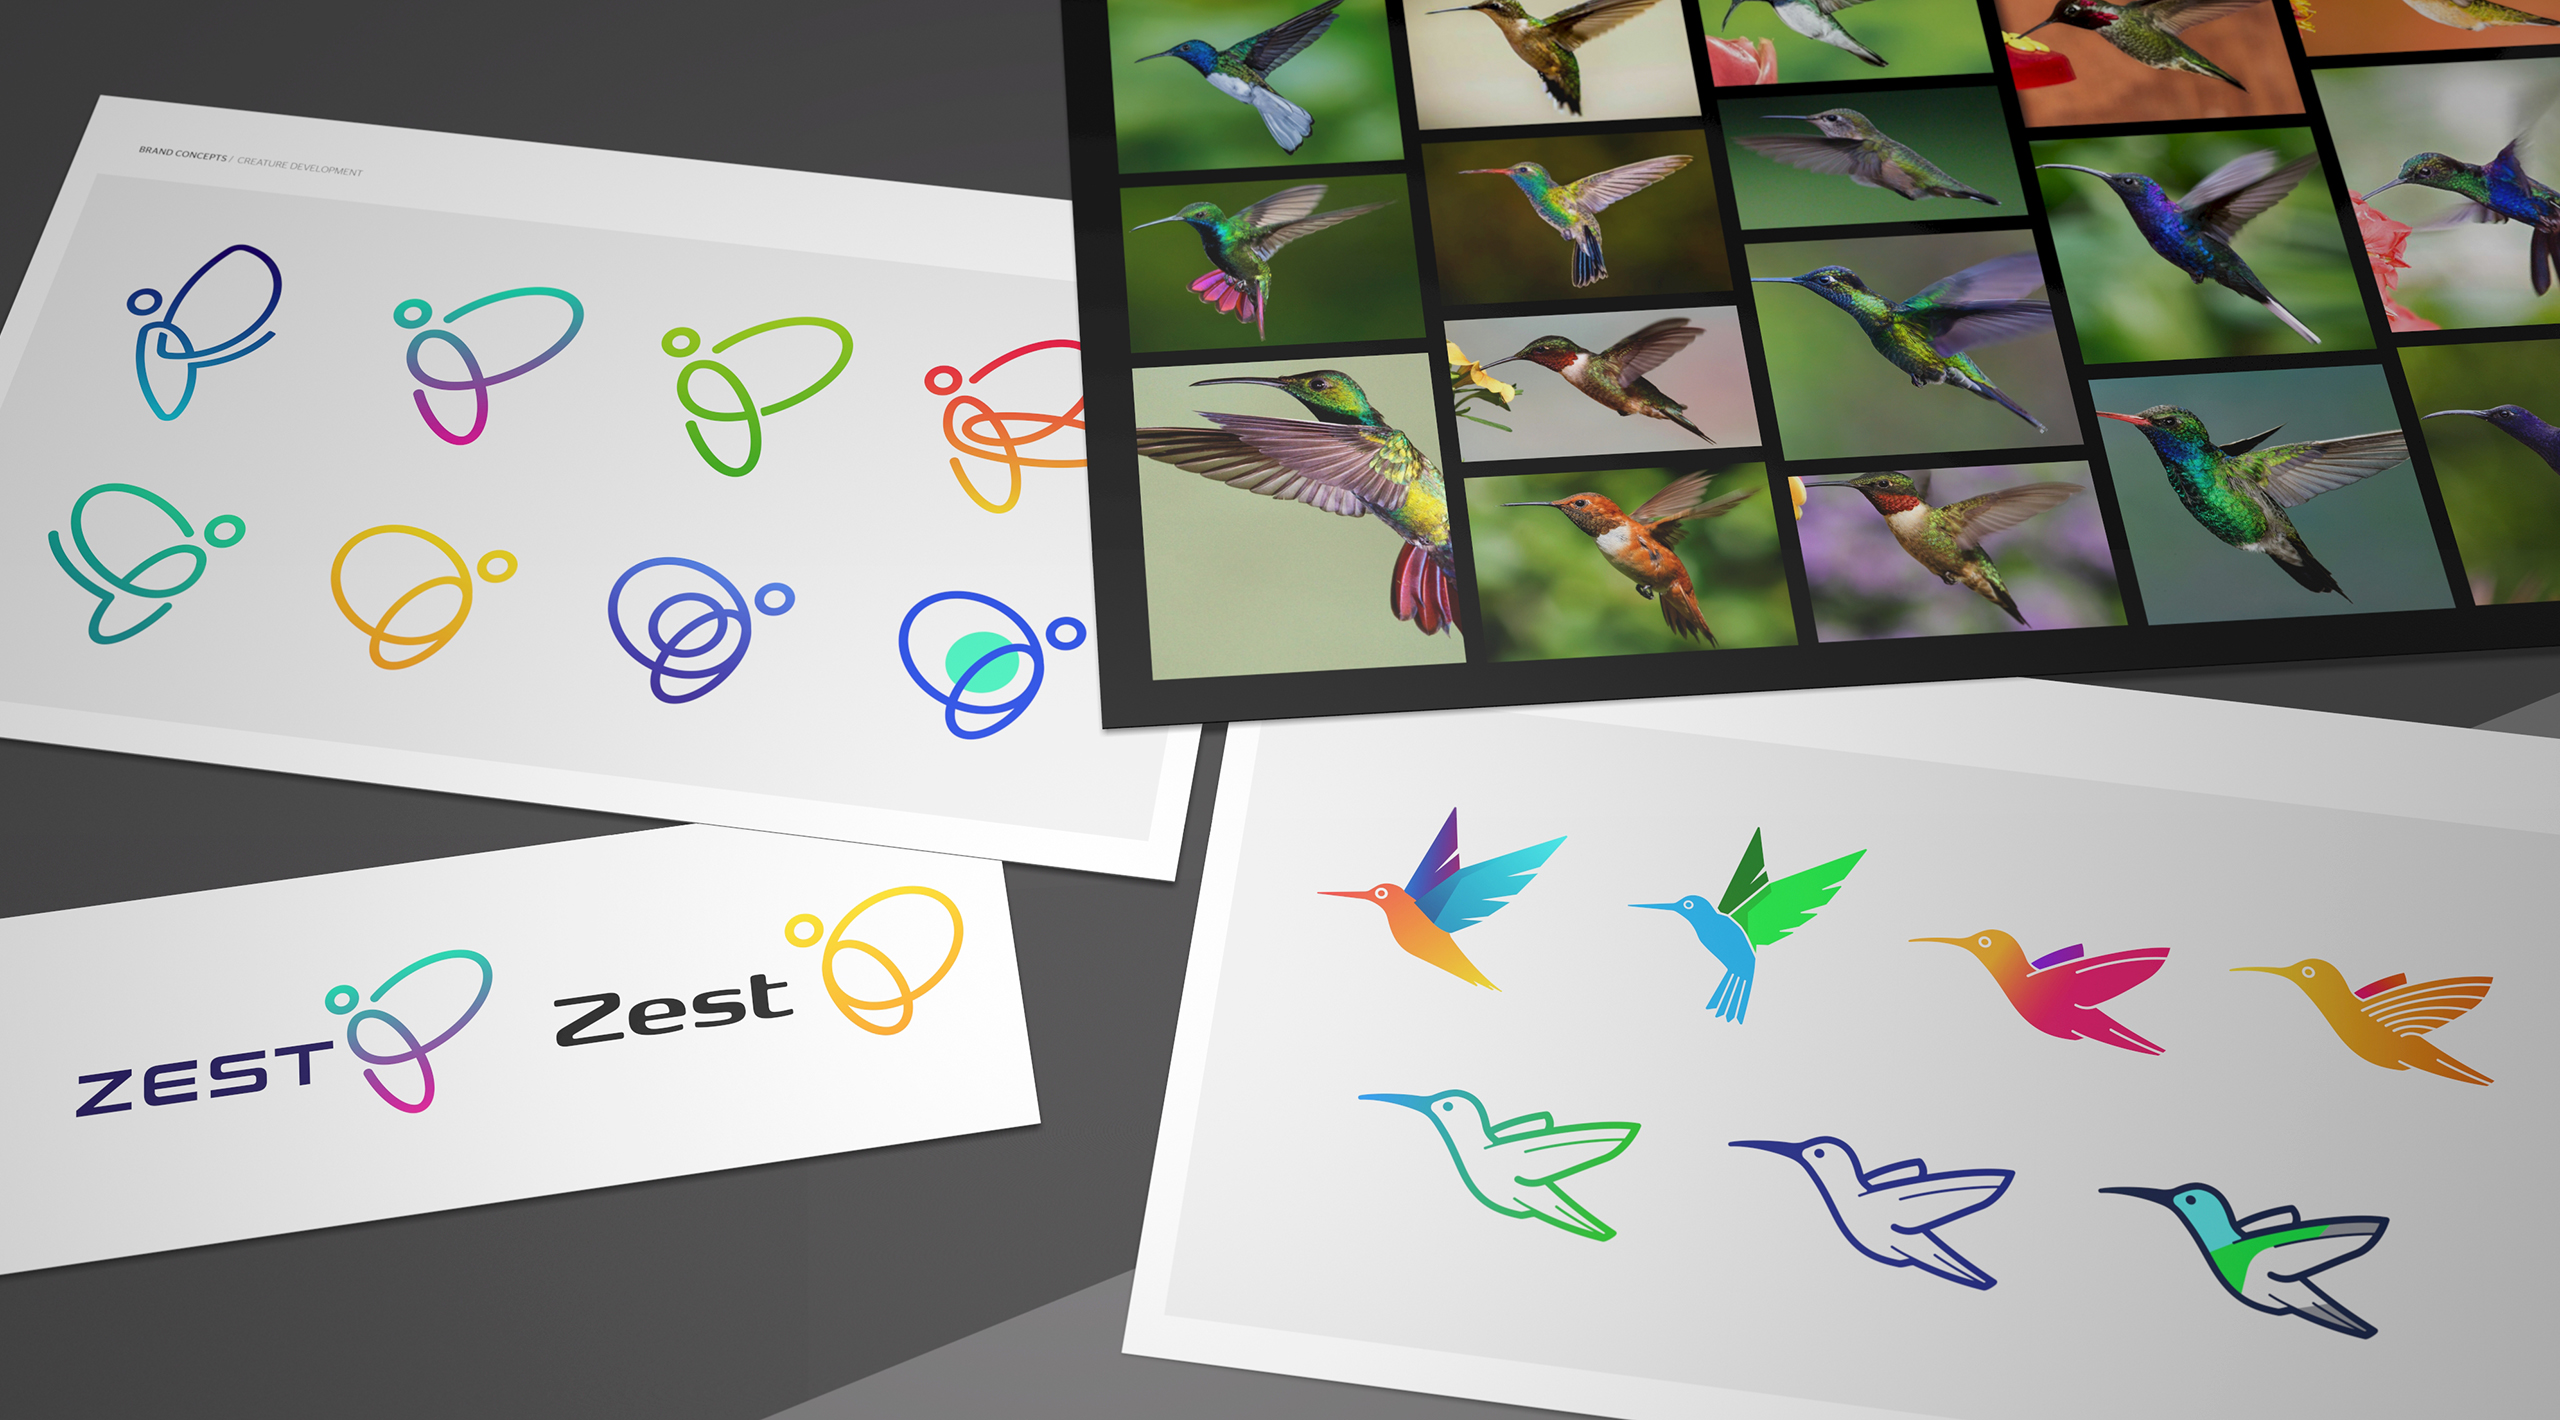 The creative shortlisting process led us to the choice between a firefly or hummingbird emblem.